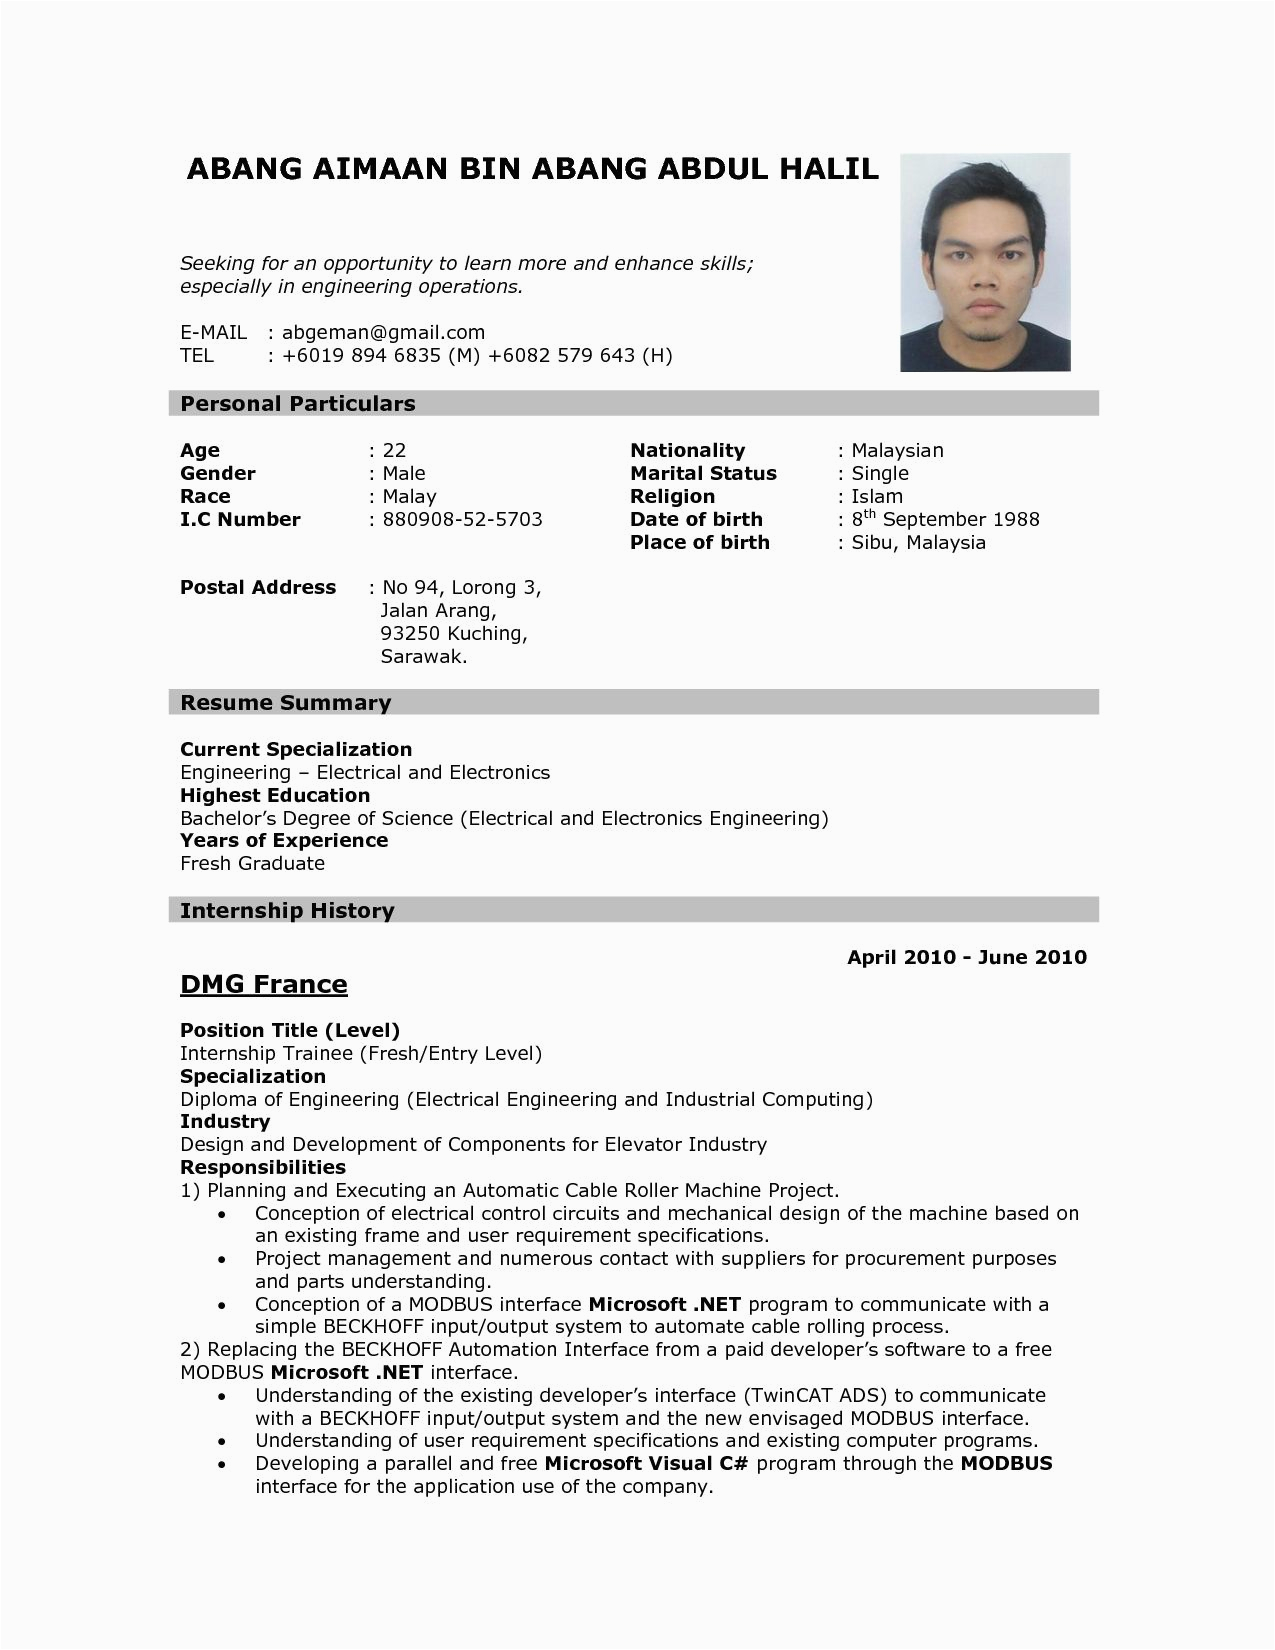 Resume Samples Example Of Resume to Apply Job Sample Resume format for Job Application Resume Templates